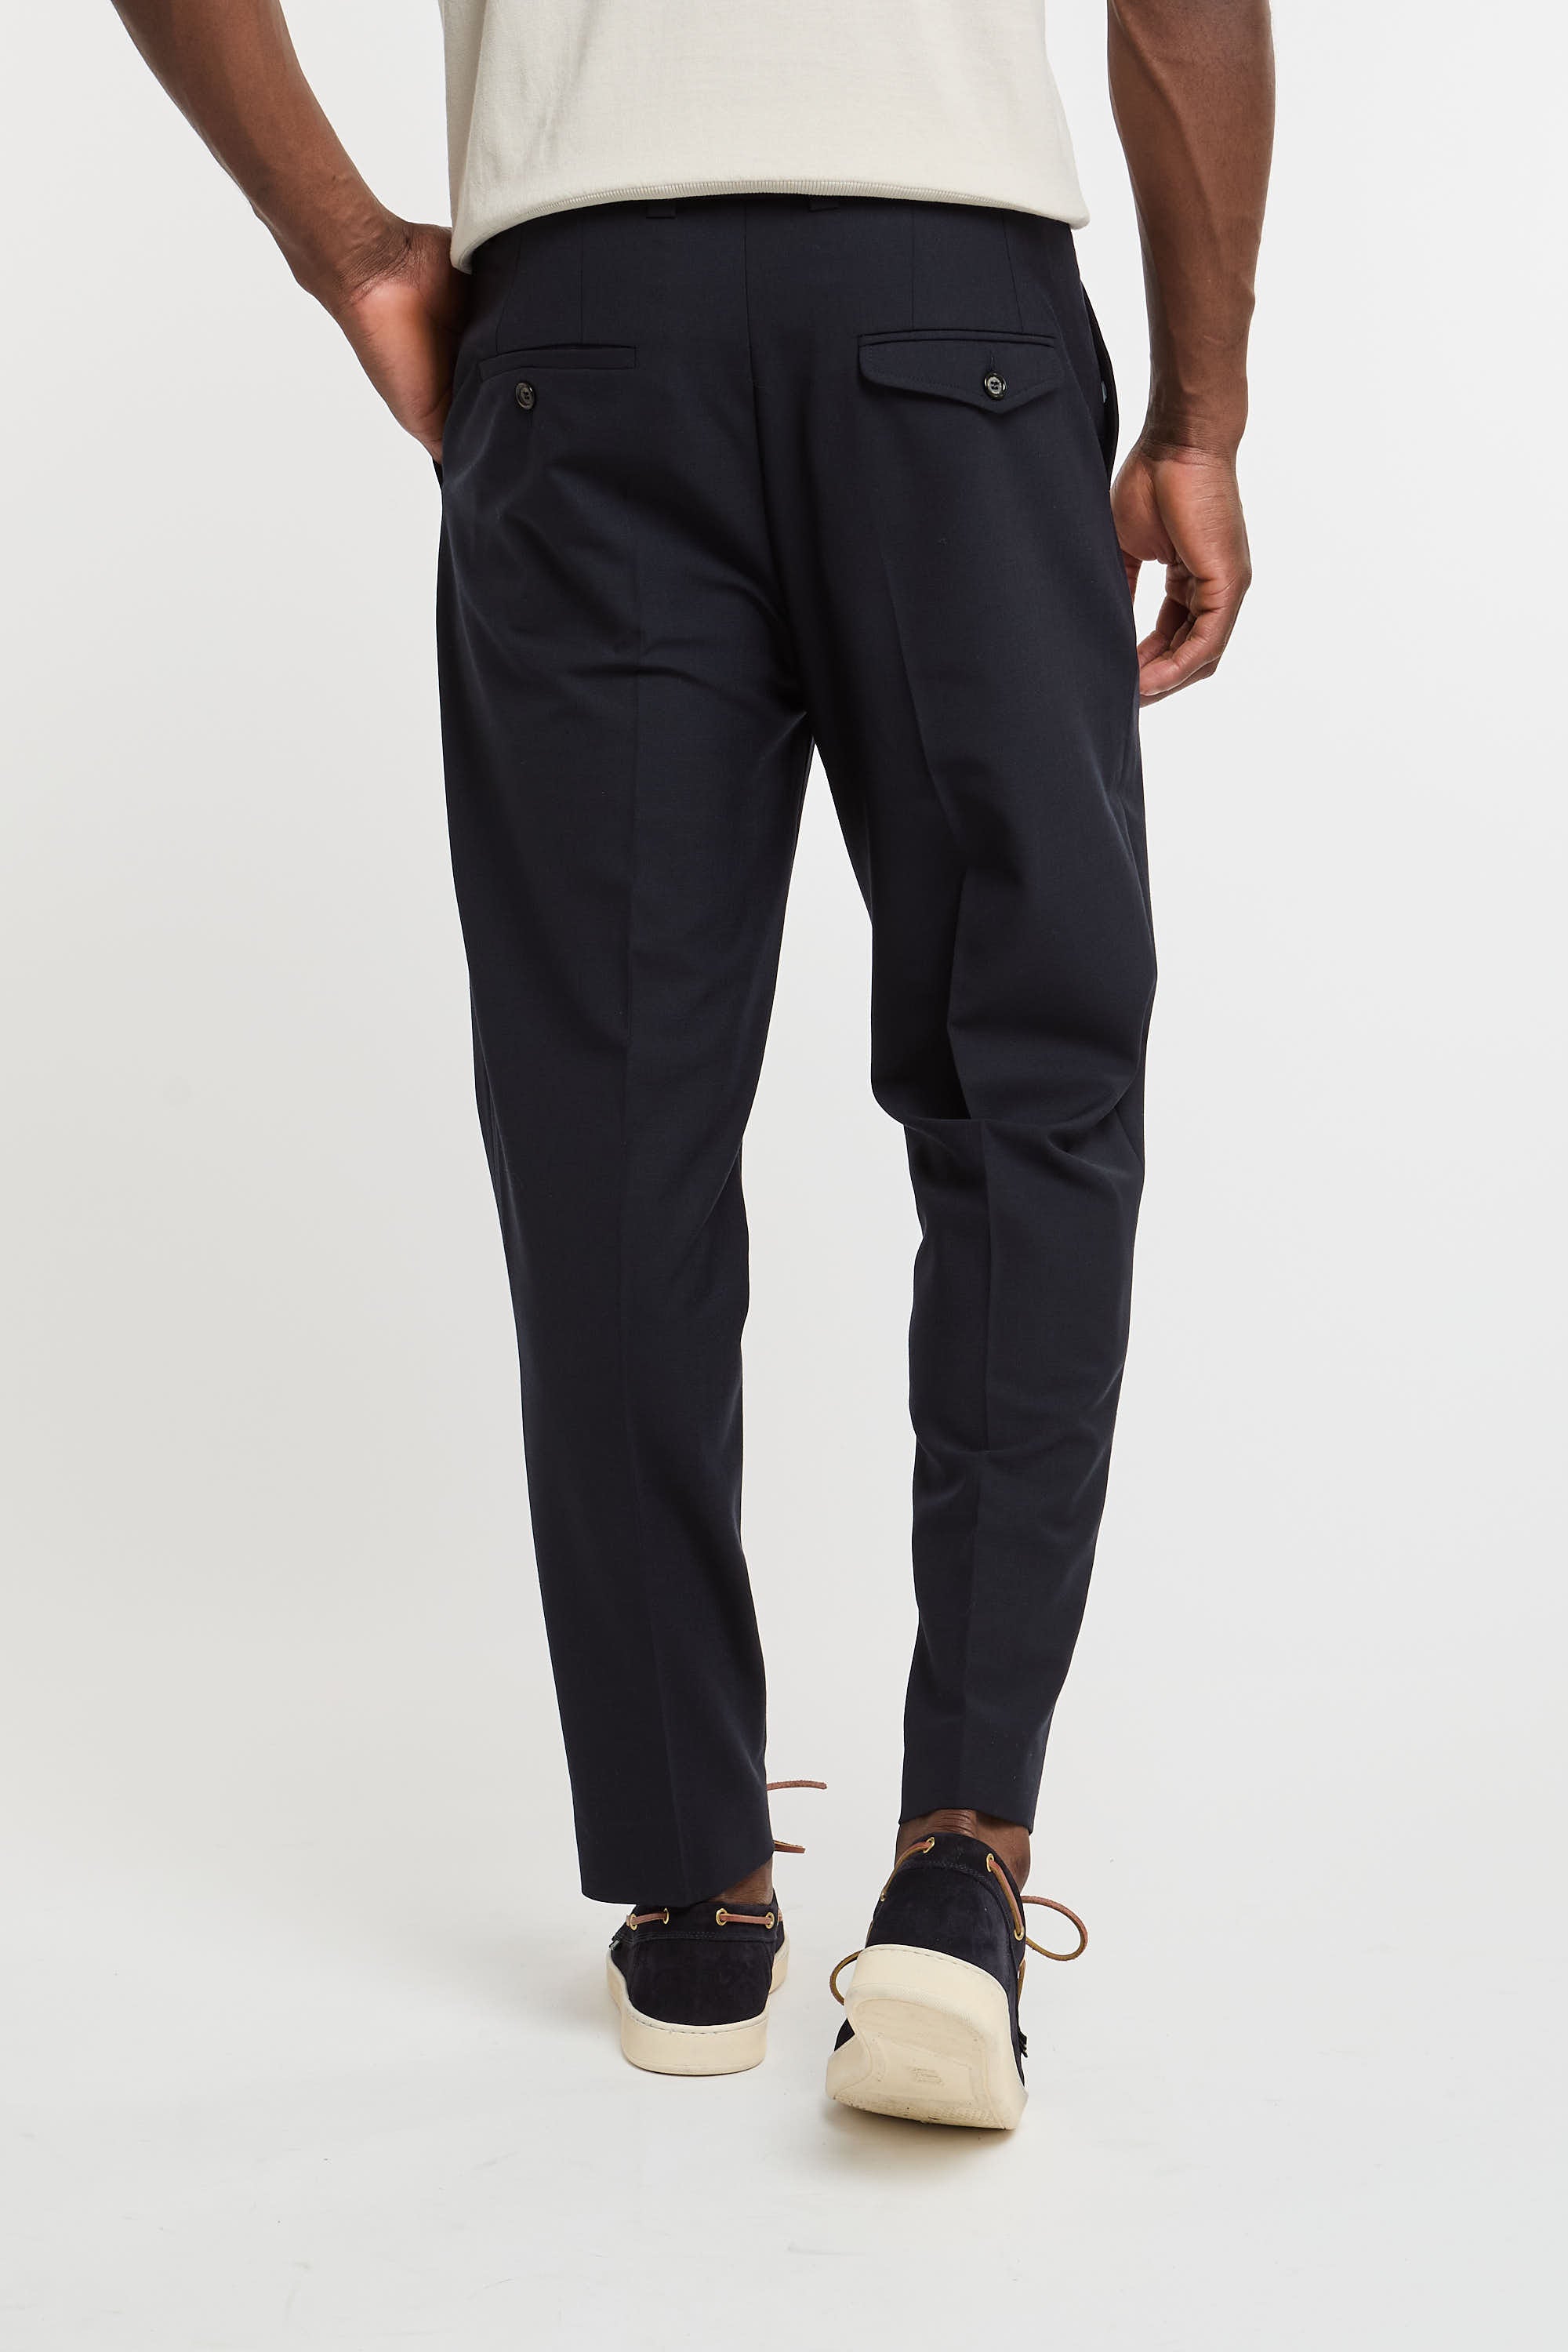 Paolo Pecora Wool/Polyester/Elastane Blue Trousers-5